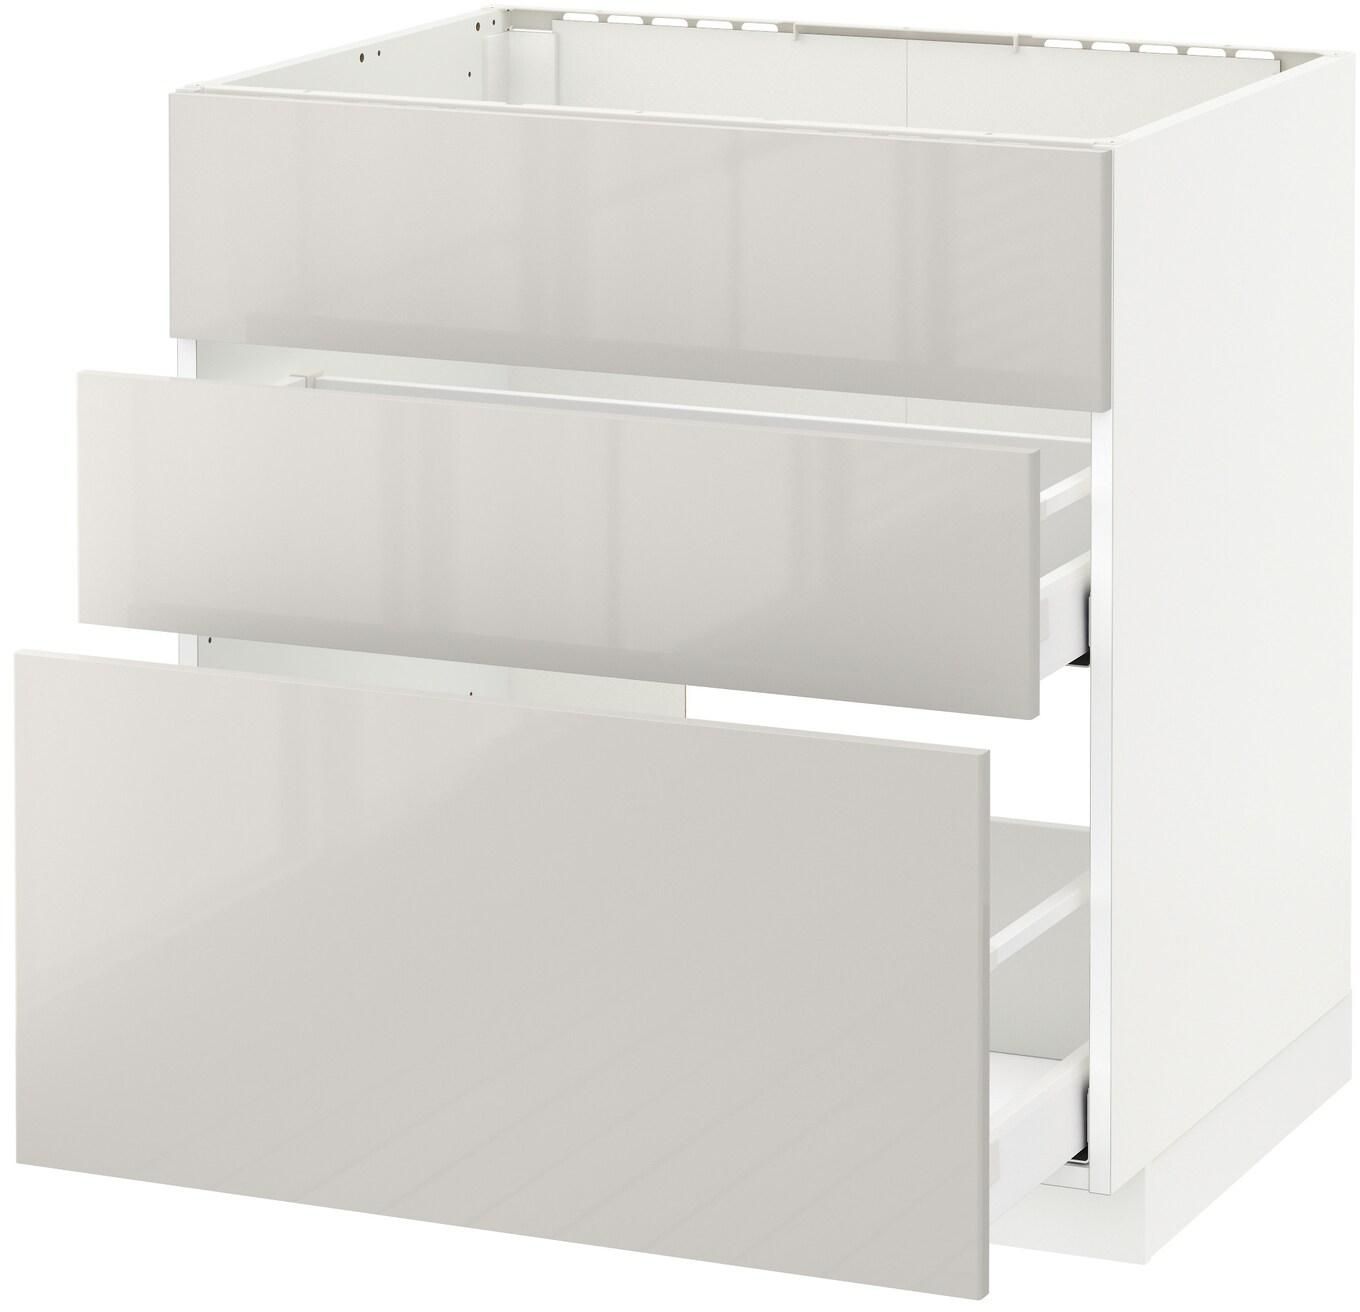 METOD / MAXIMERA Base cab f sink+3 fronts/2 drawers - white/Ringhult light grey 80x60 cm